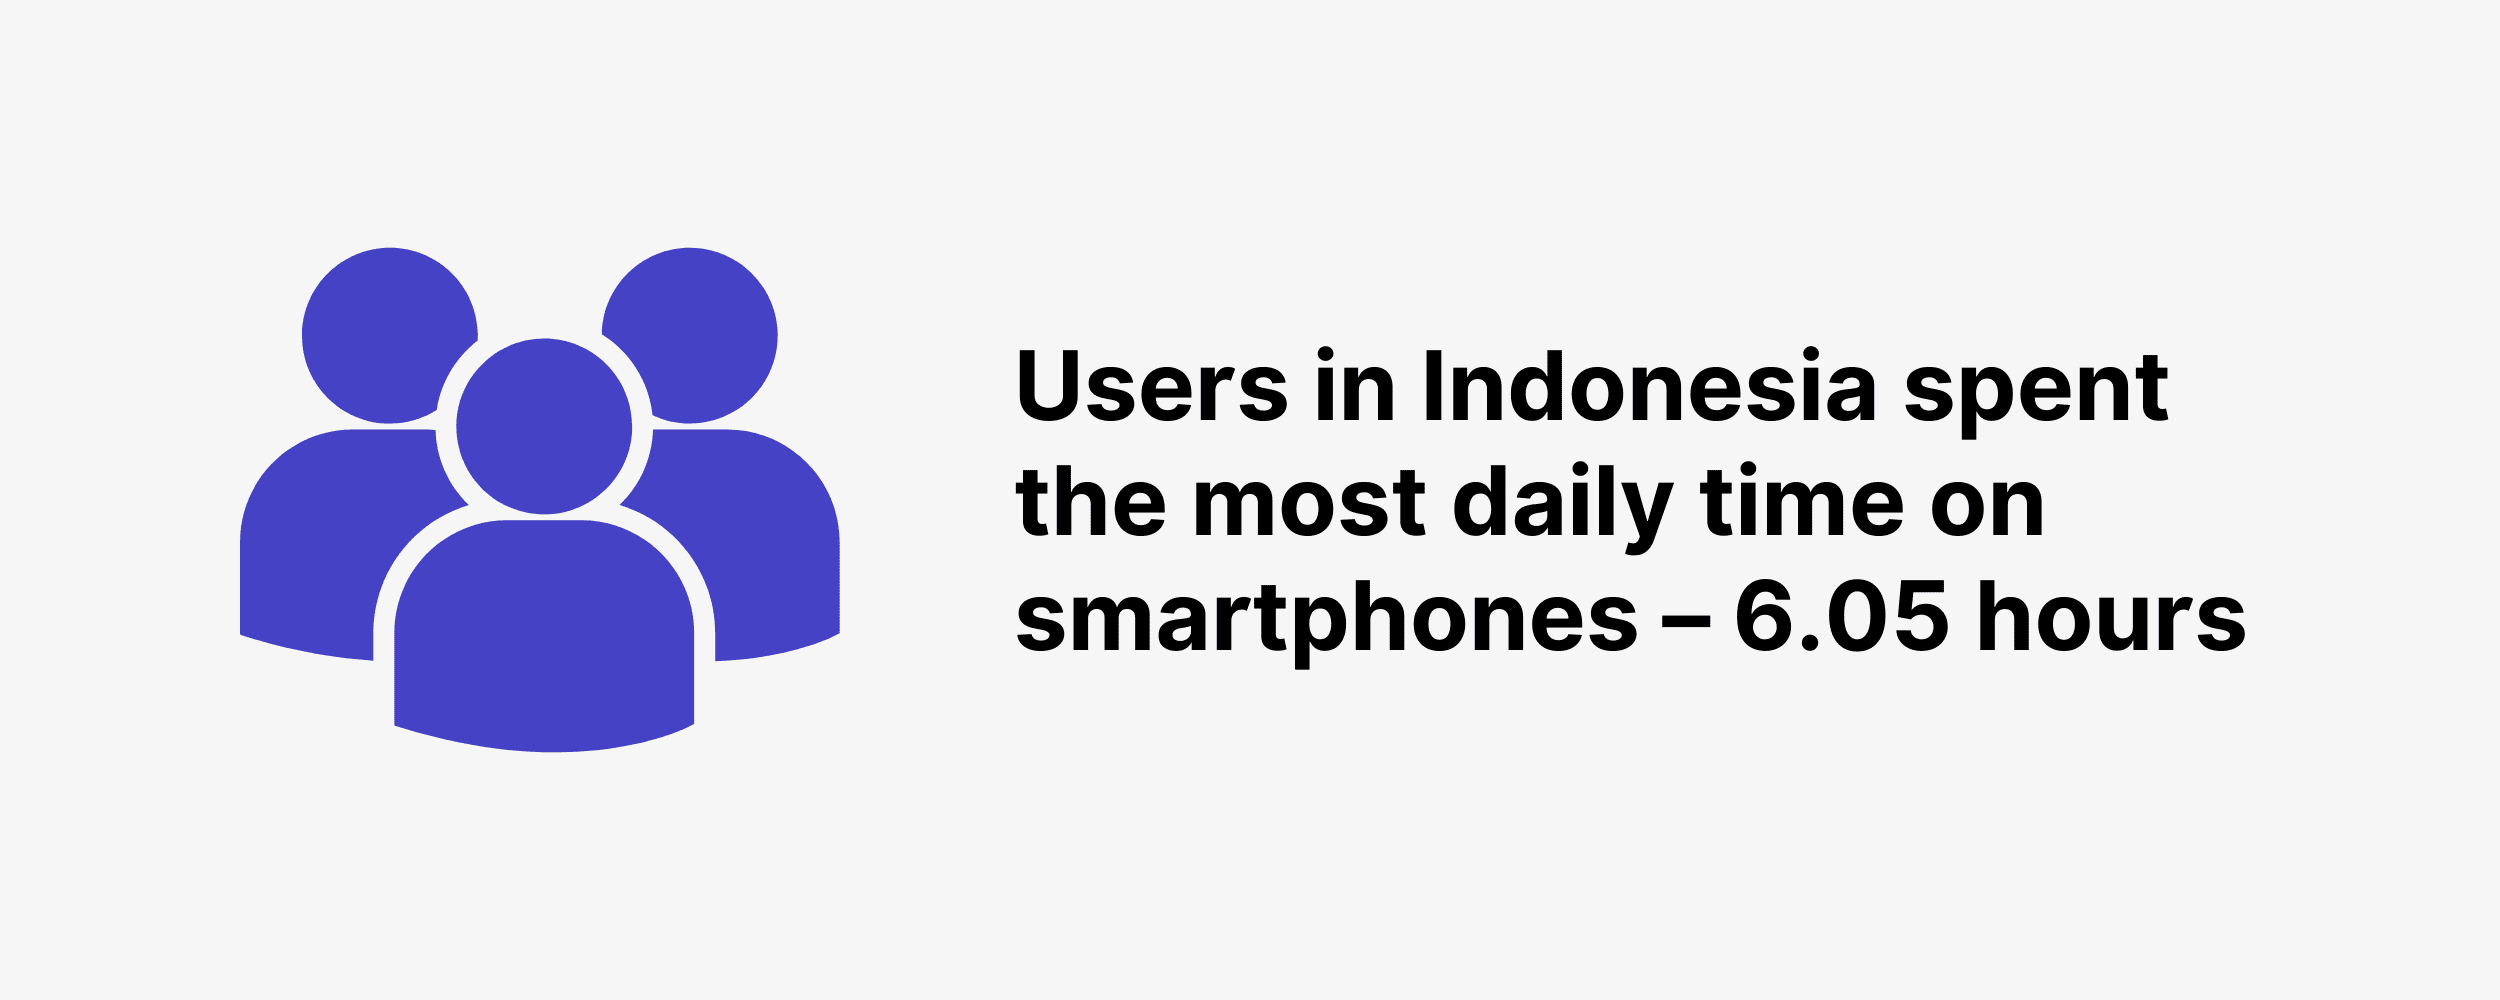 Users in Indonesia spent the most daily time on smartphones – 6.05 hours